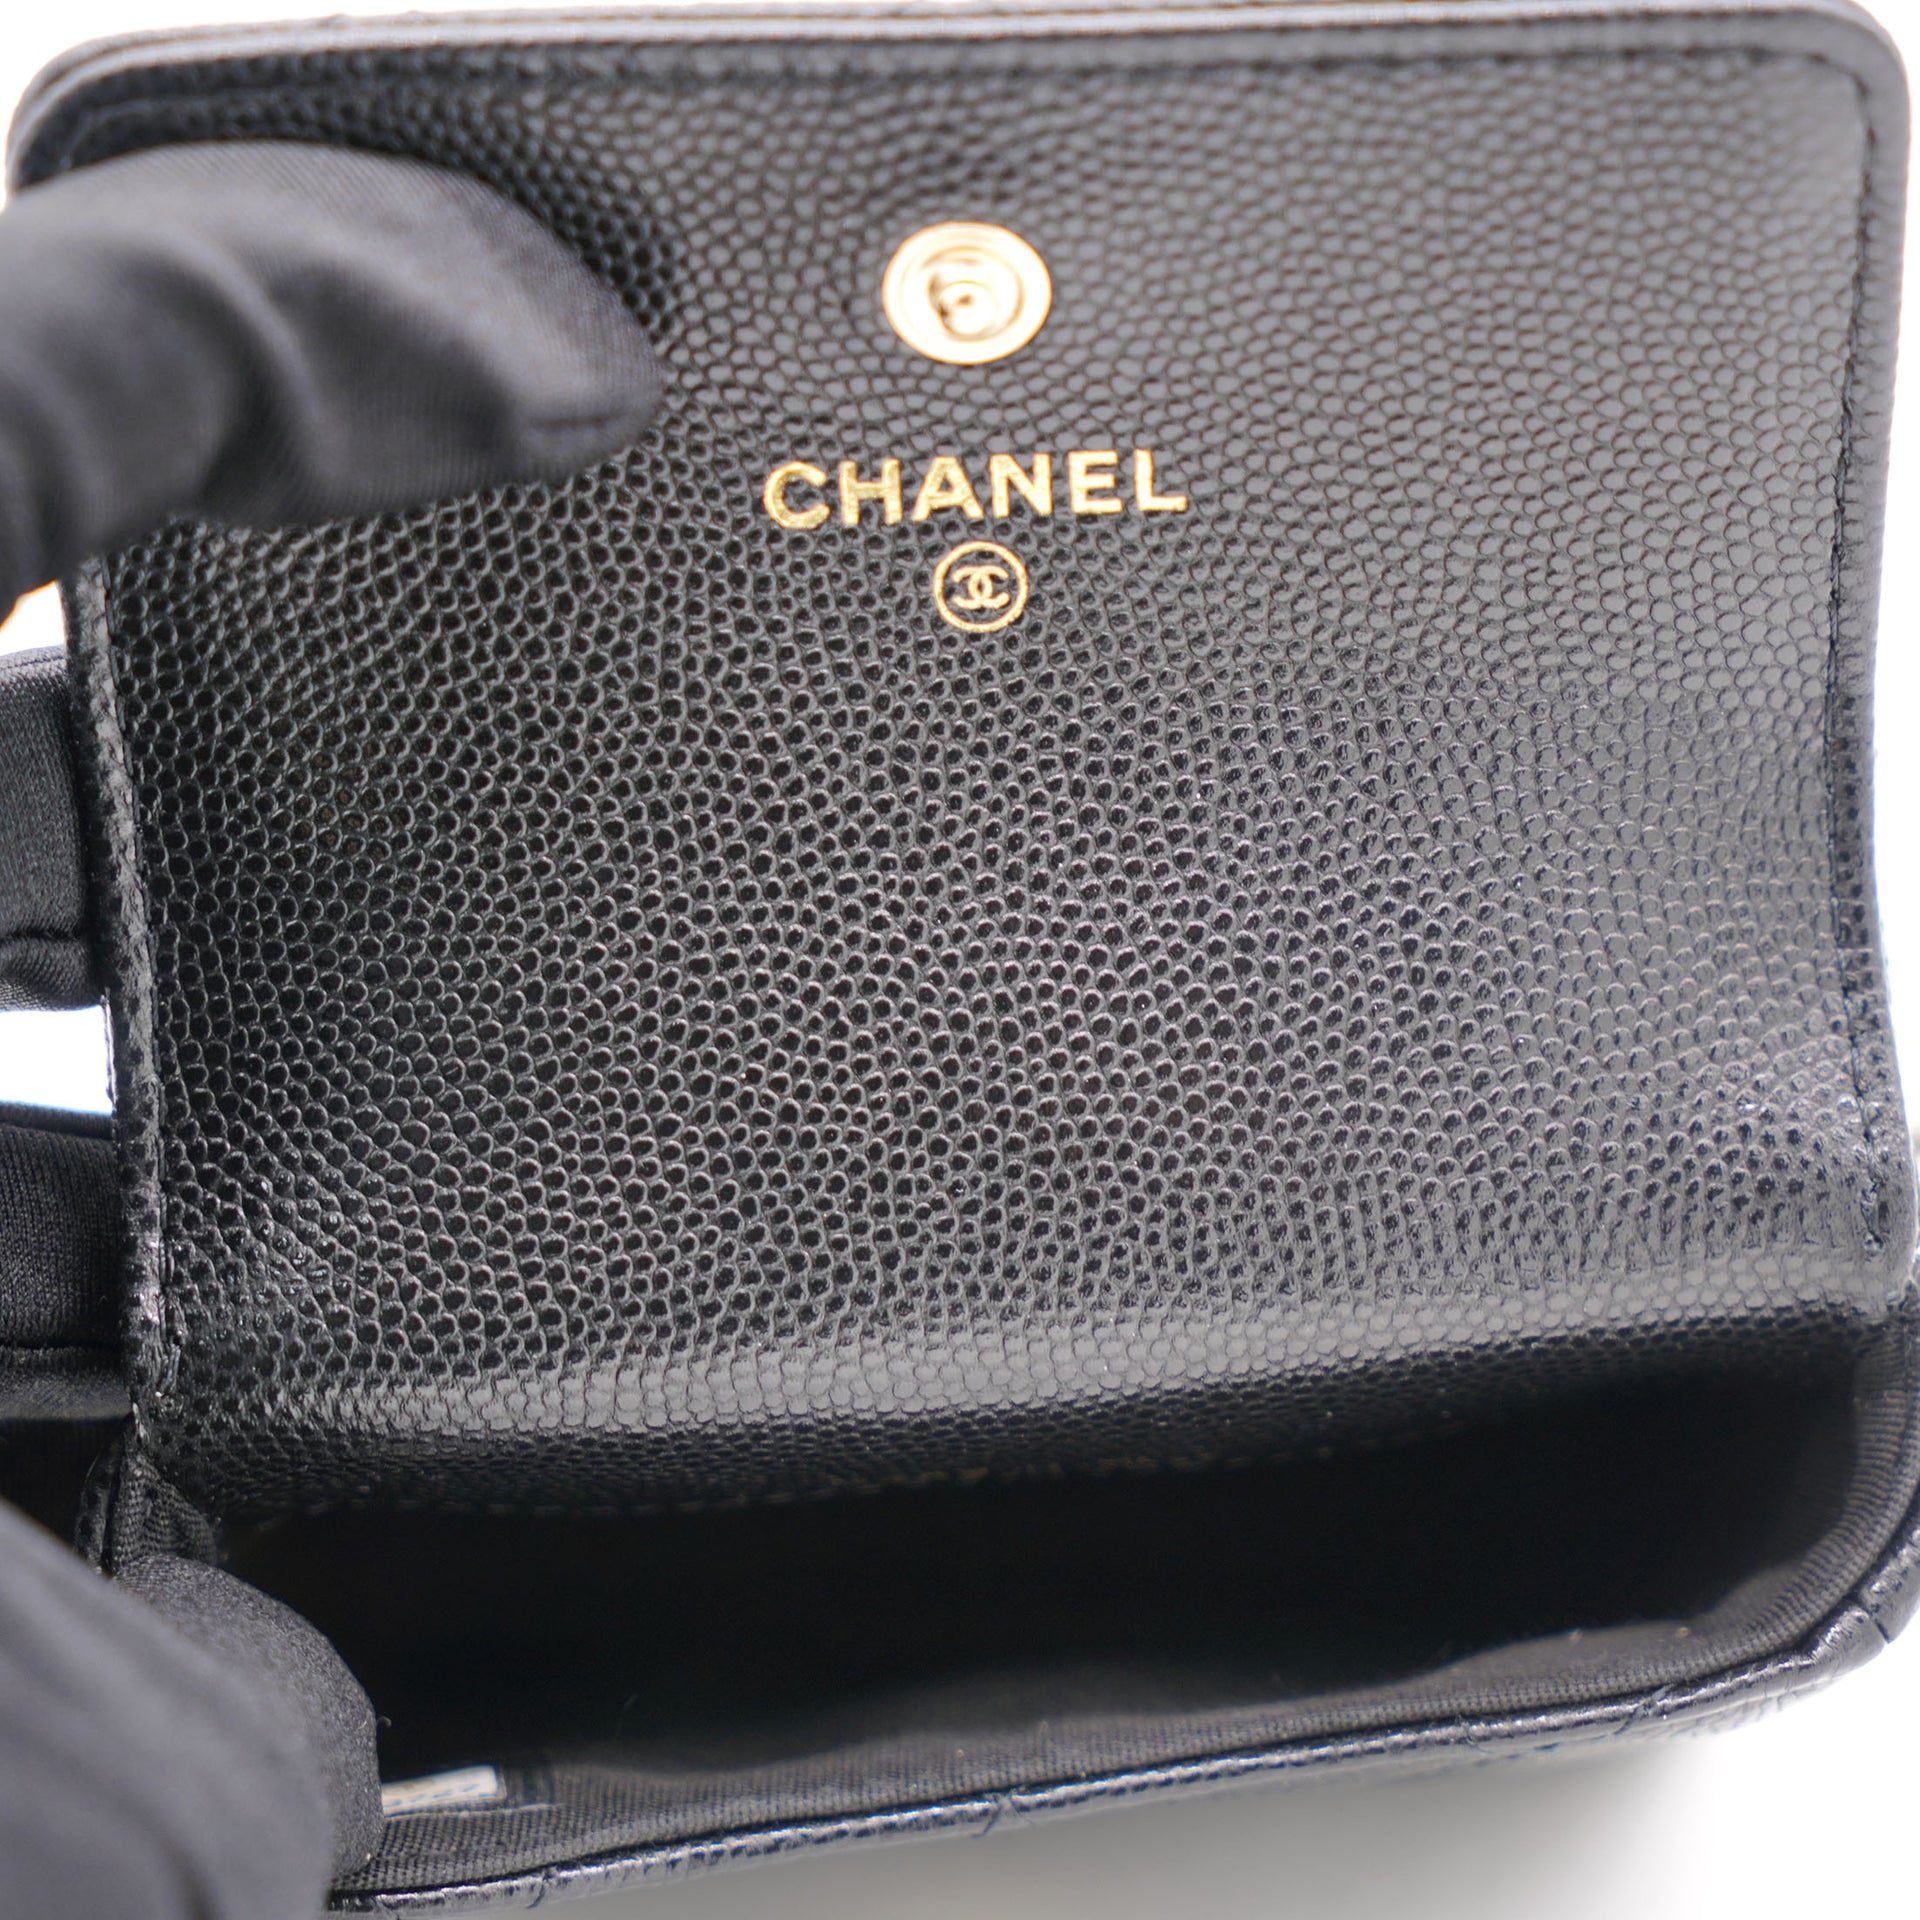 Chanel Black Caviar Leather Pearl Flap Card Holder with Short